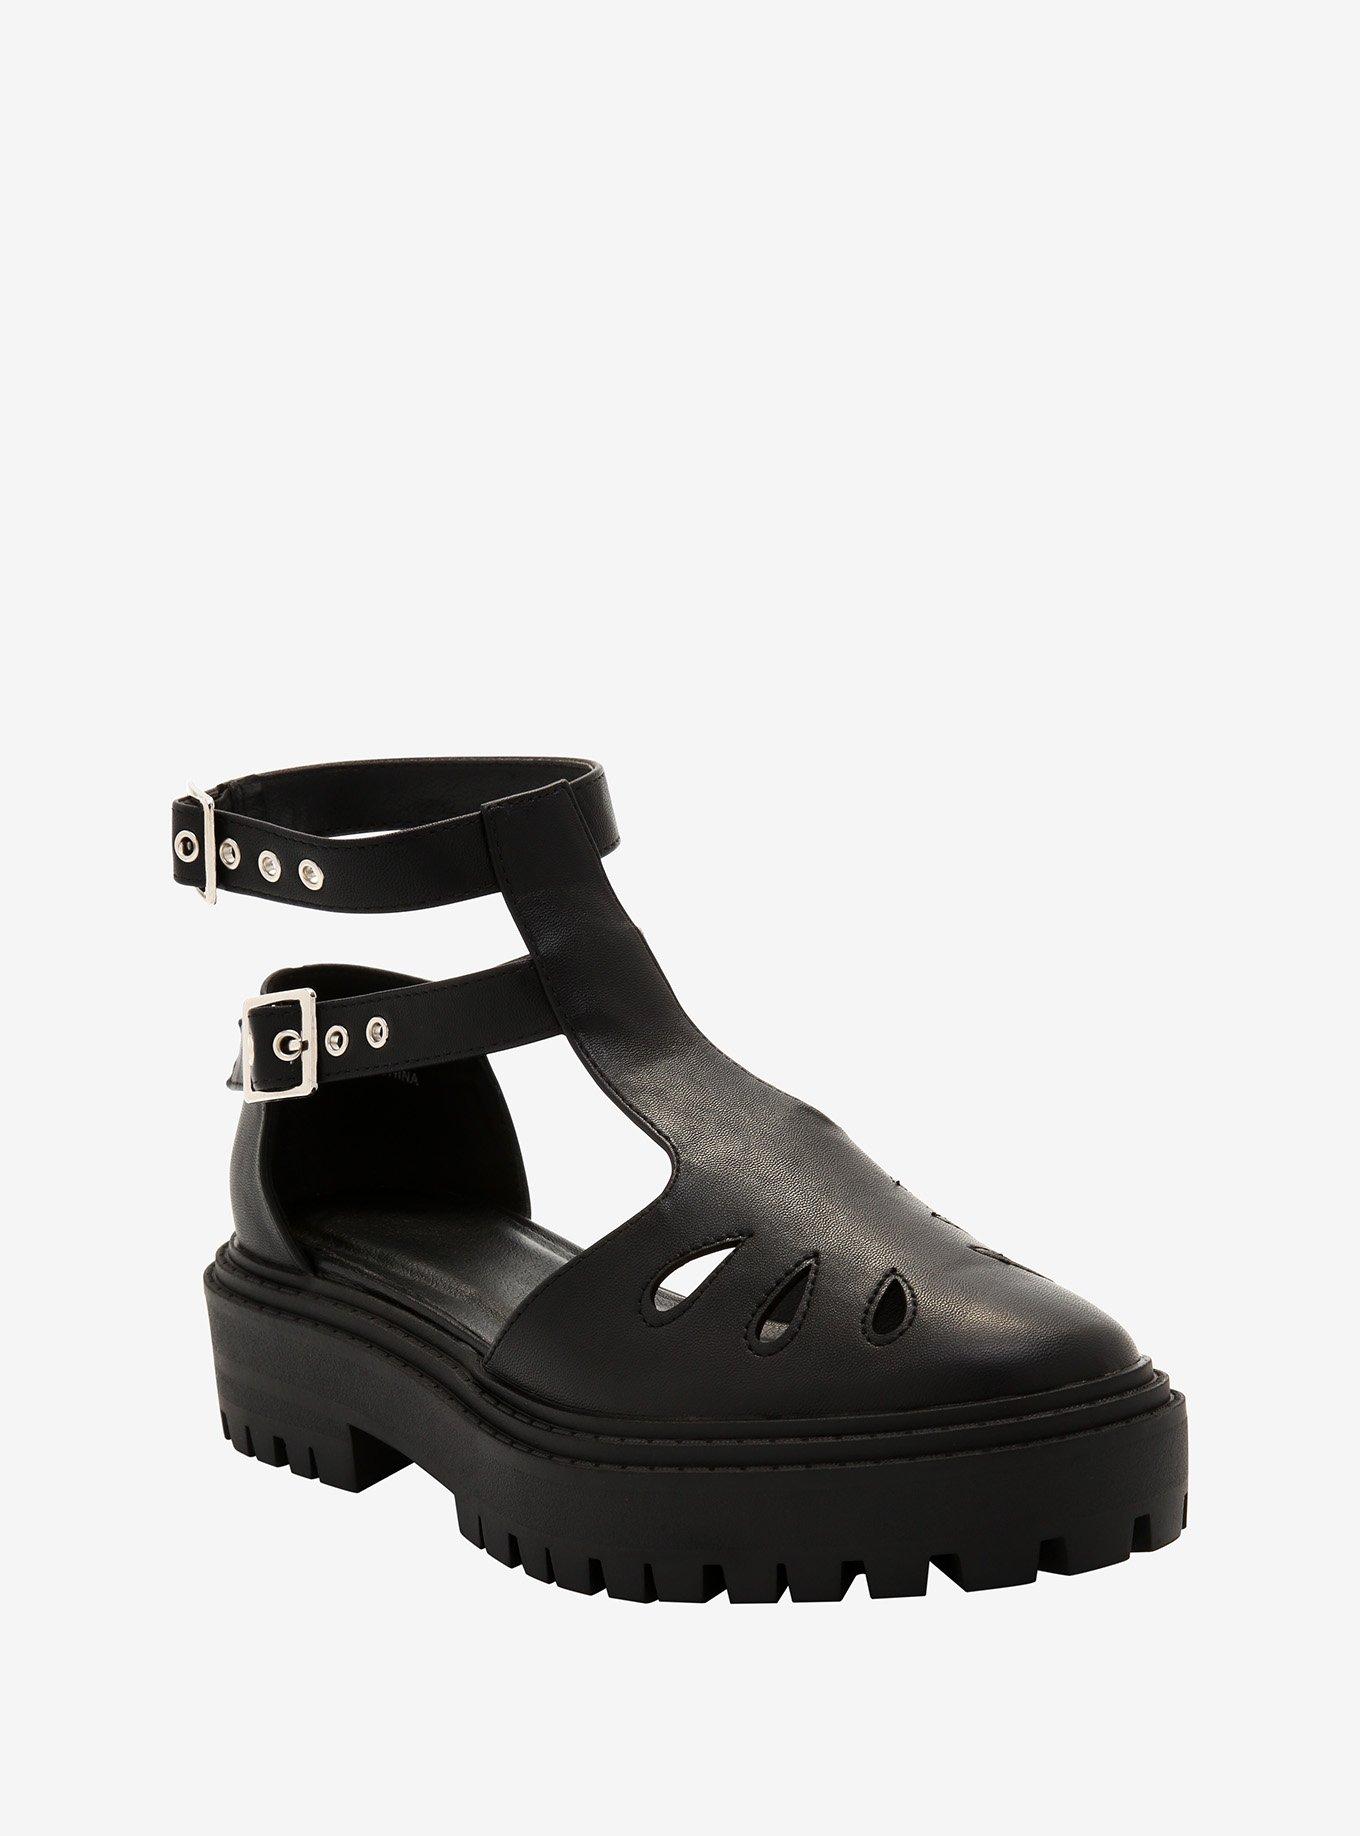 Black Double Buckle T-Strap Mary Janes, MULTI, hi-res